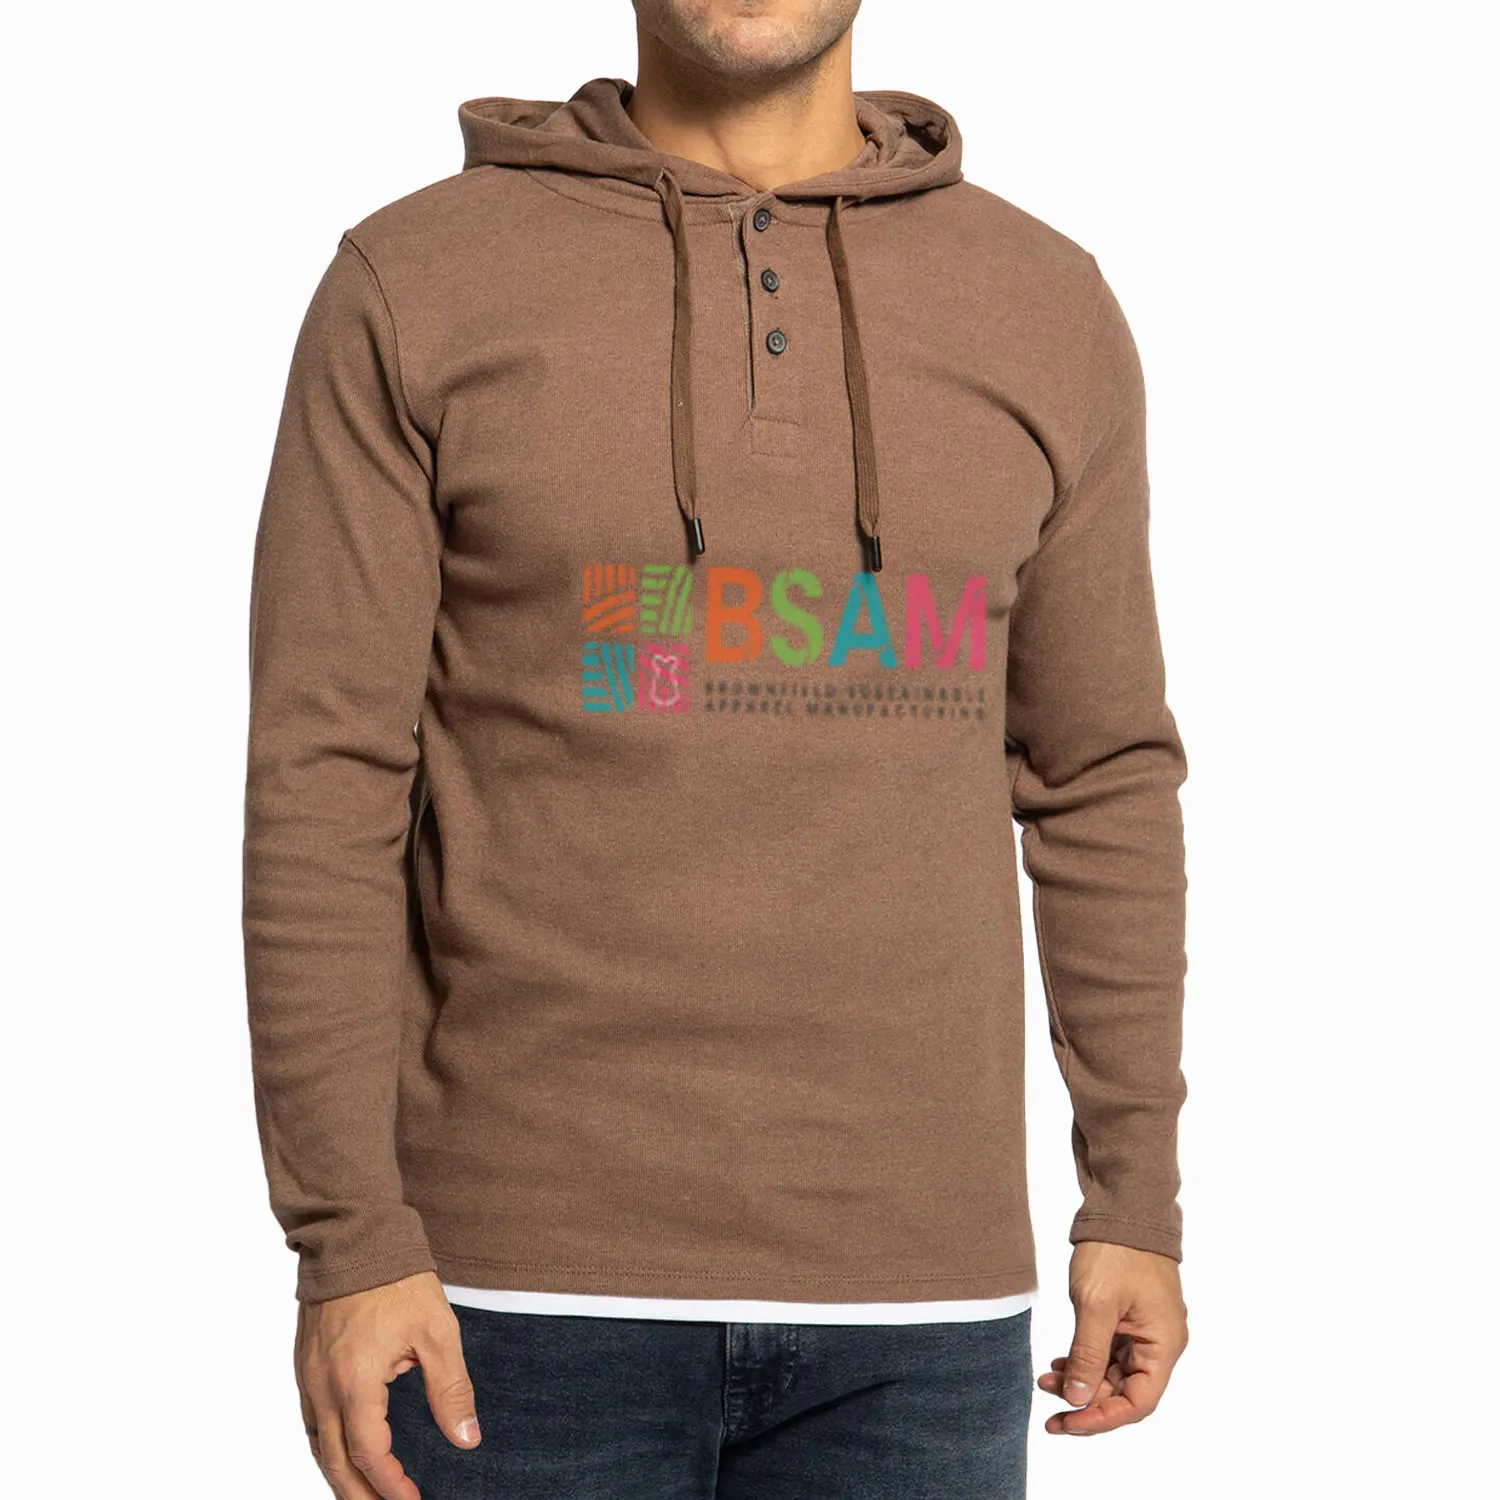 Personalized Corporate Promotional Gift High Quality Logo Printed Unisex Hem Hoodies Breathable Clothing Manufacturer From BD